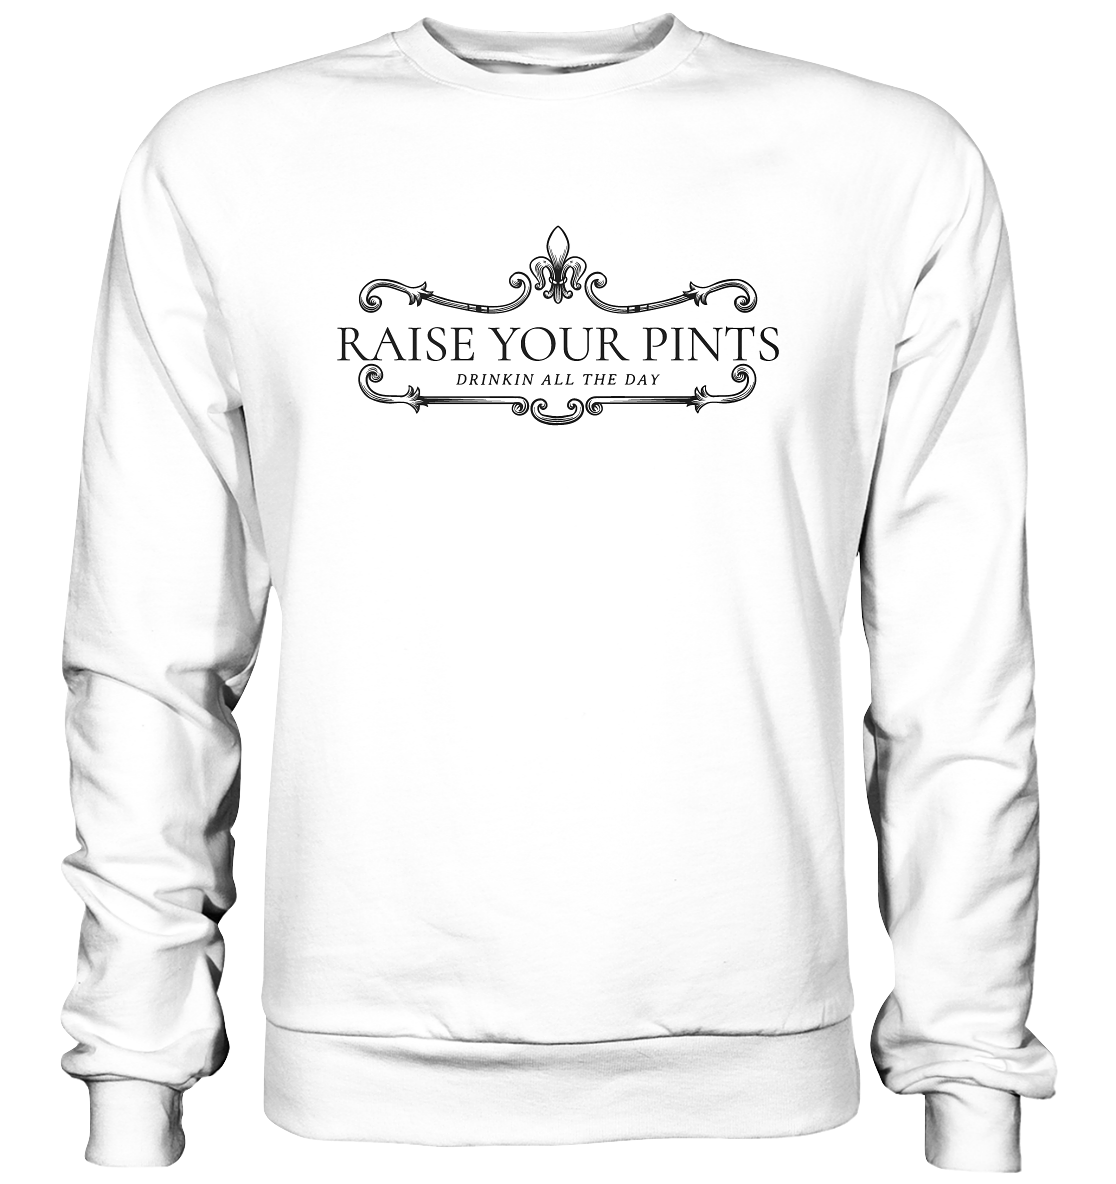 Raise Your Pints "Drinking All The Day" - Basic Sweatshirt